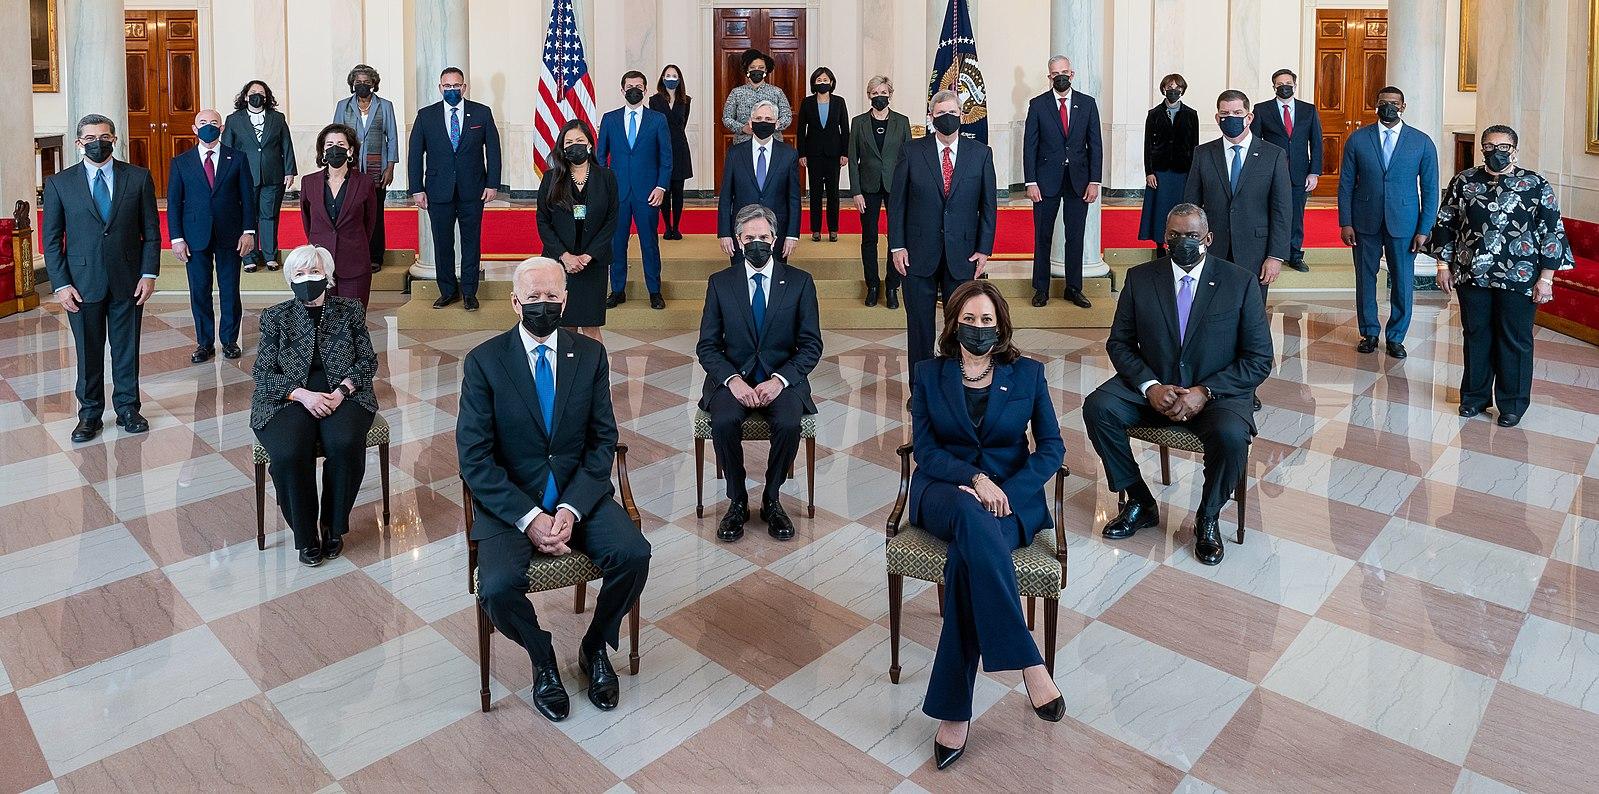 President Biden's Cabinet members sitting in chairs and wearing masks